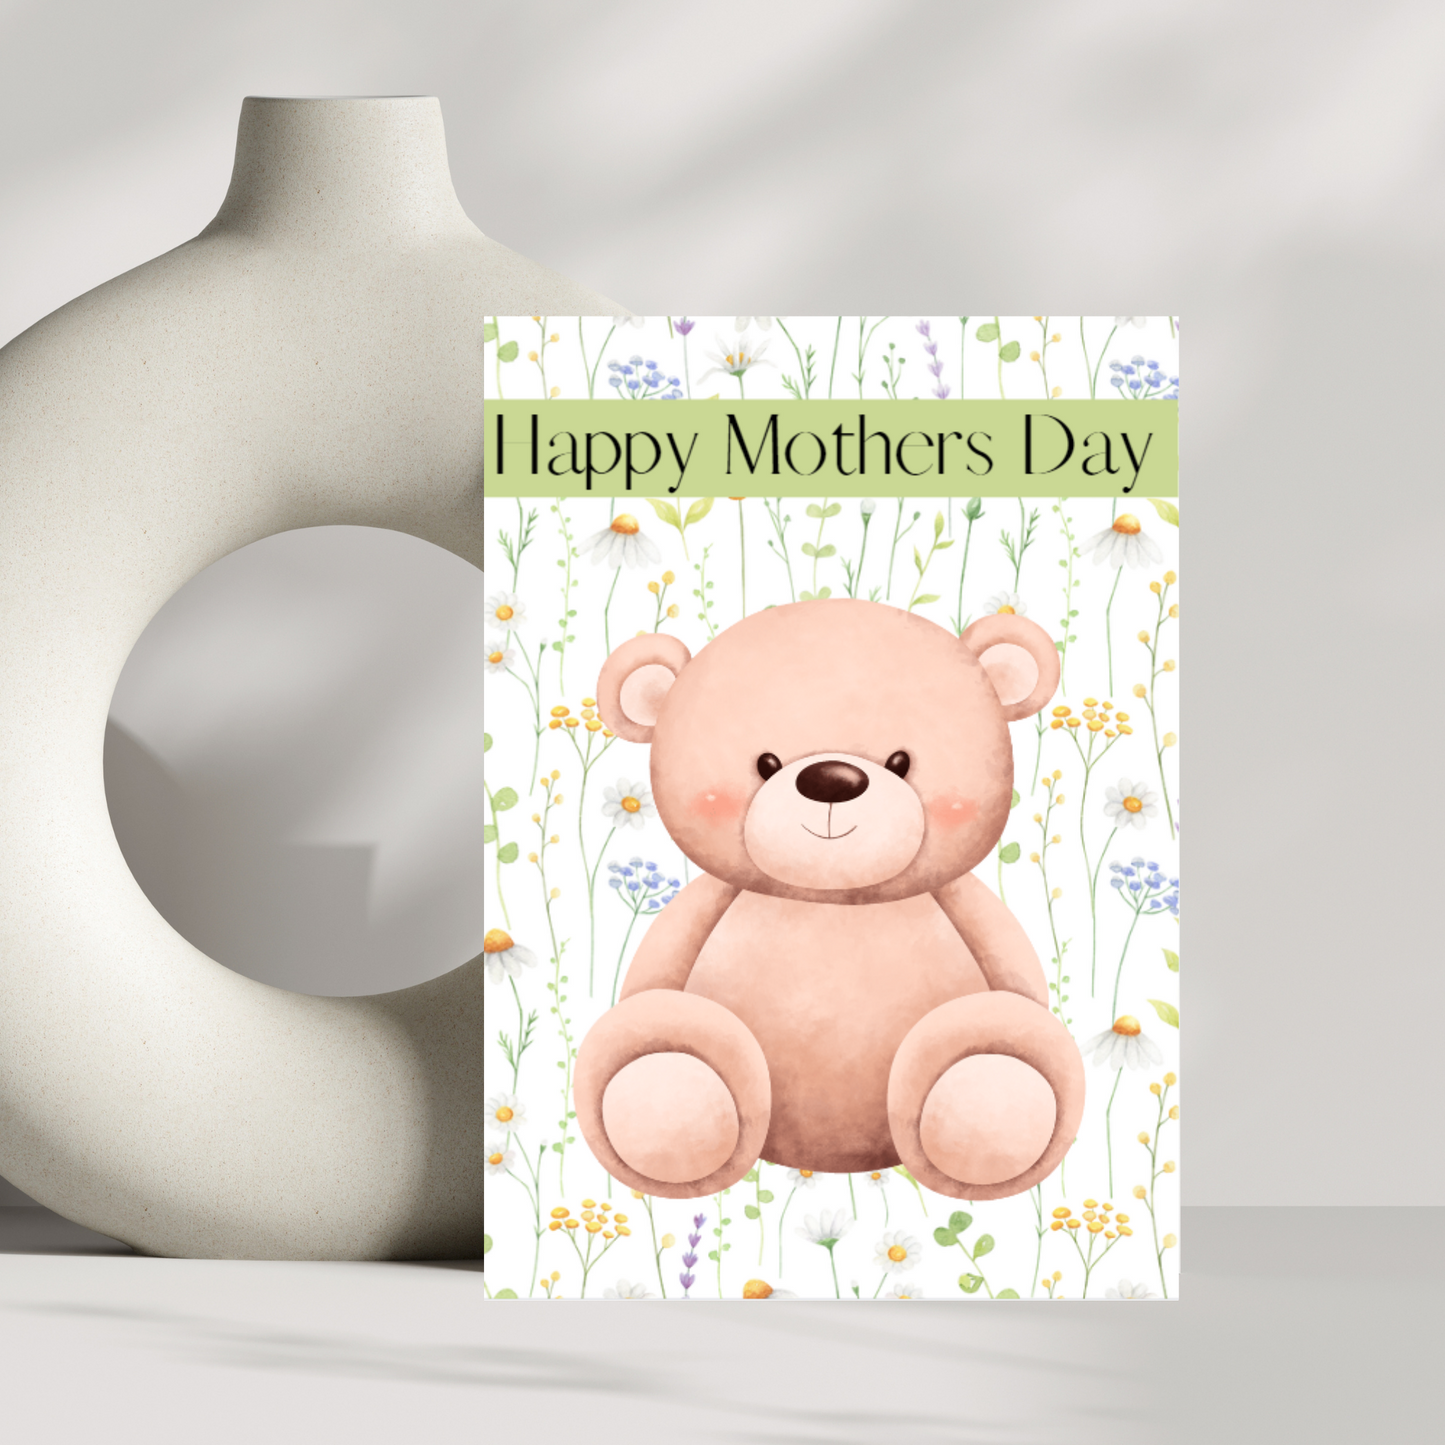 Happy Mothers day - Teddy bear & flowers - Mothers day card